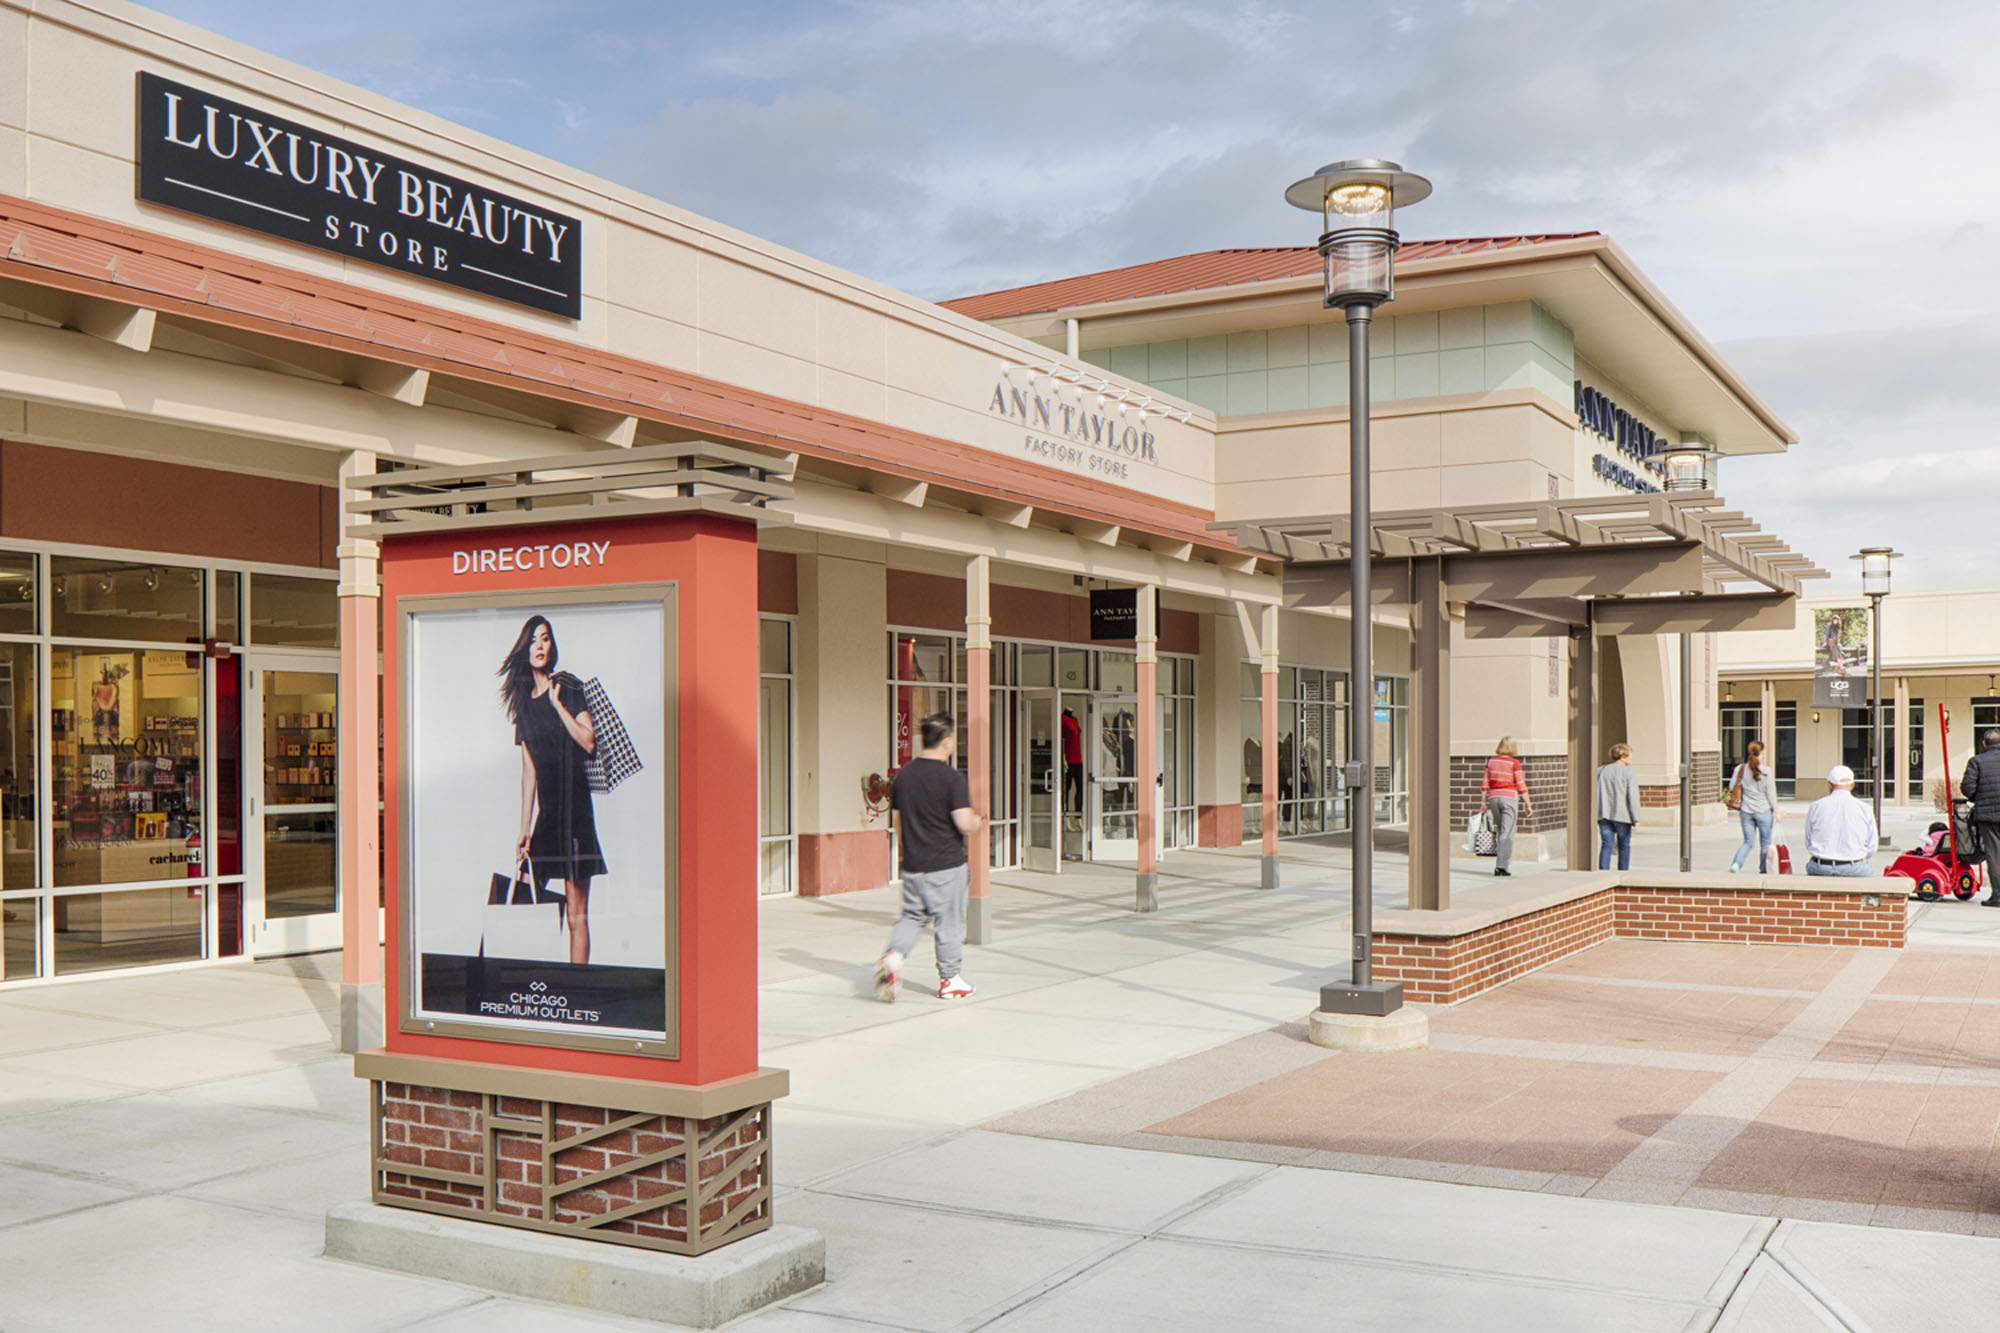 Chicago Premium Outlets - 114 tips from 20080 visitors